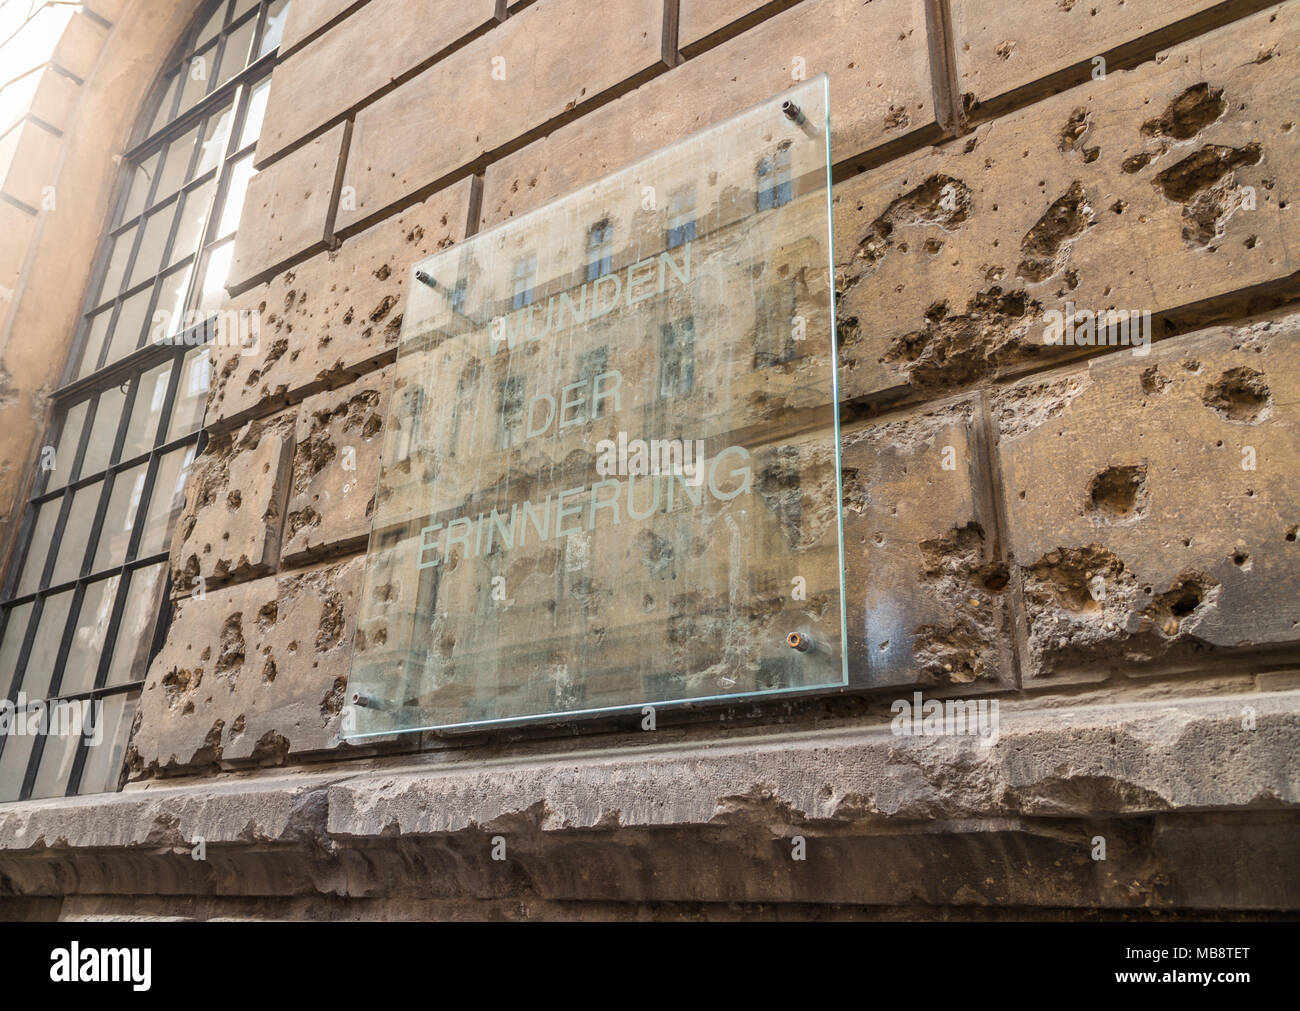 Storehouse of the Academy of Fine Arts Vienna showing preserved world war 2 damage from the Battle in 1945 with the Soviet Army, bullet holes on the f Stock Photo